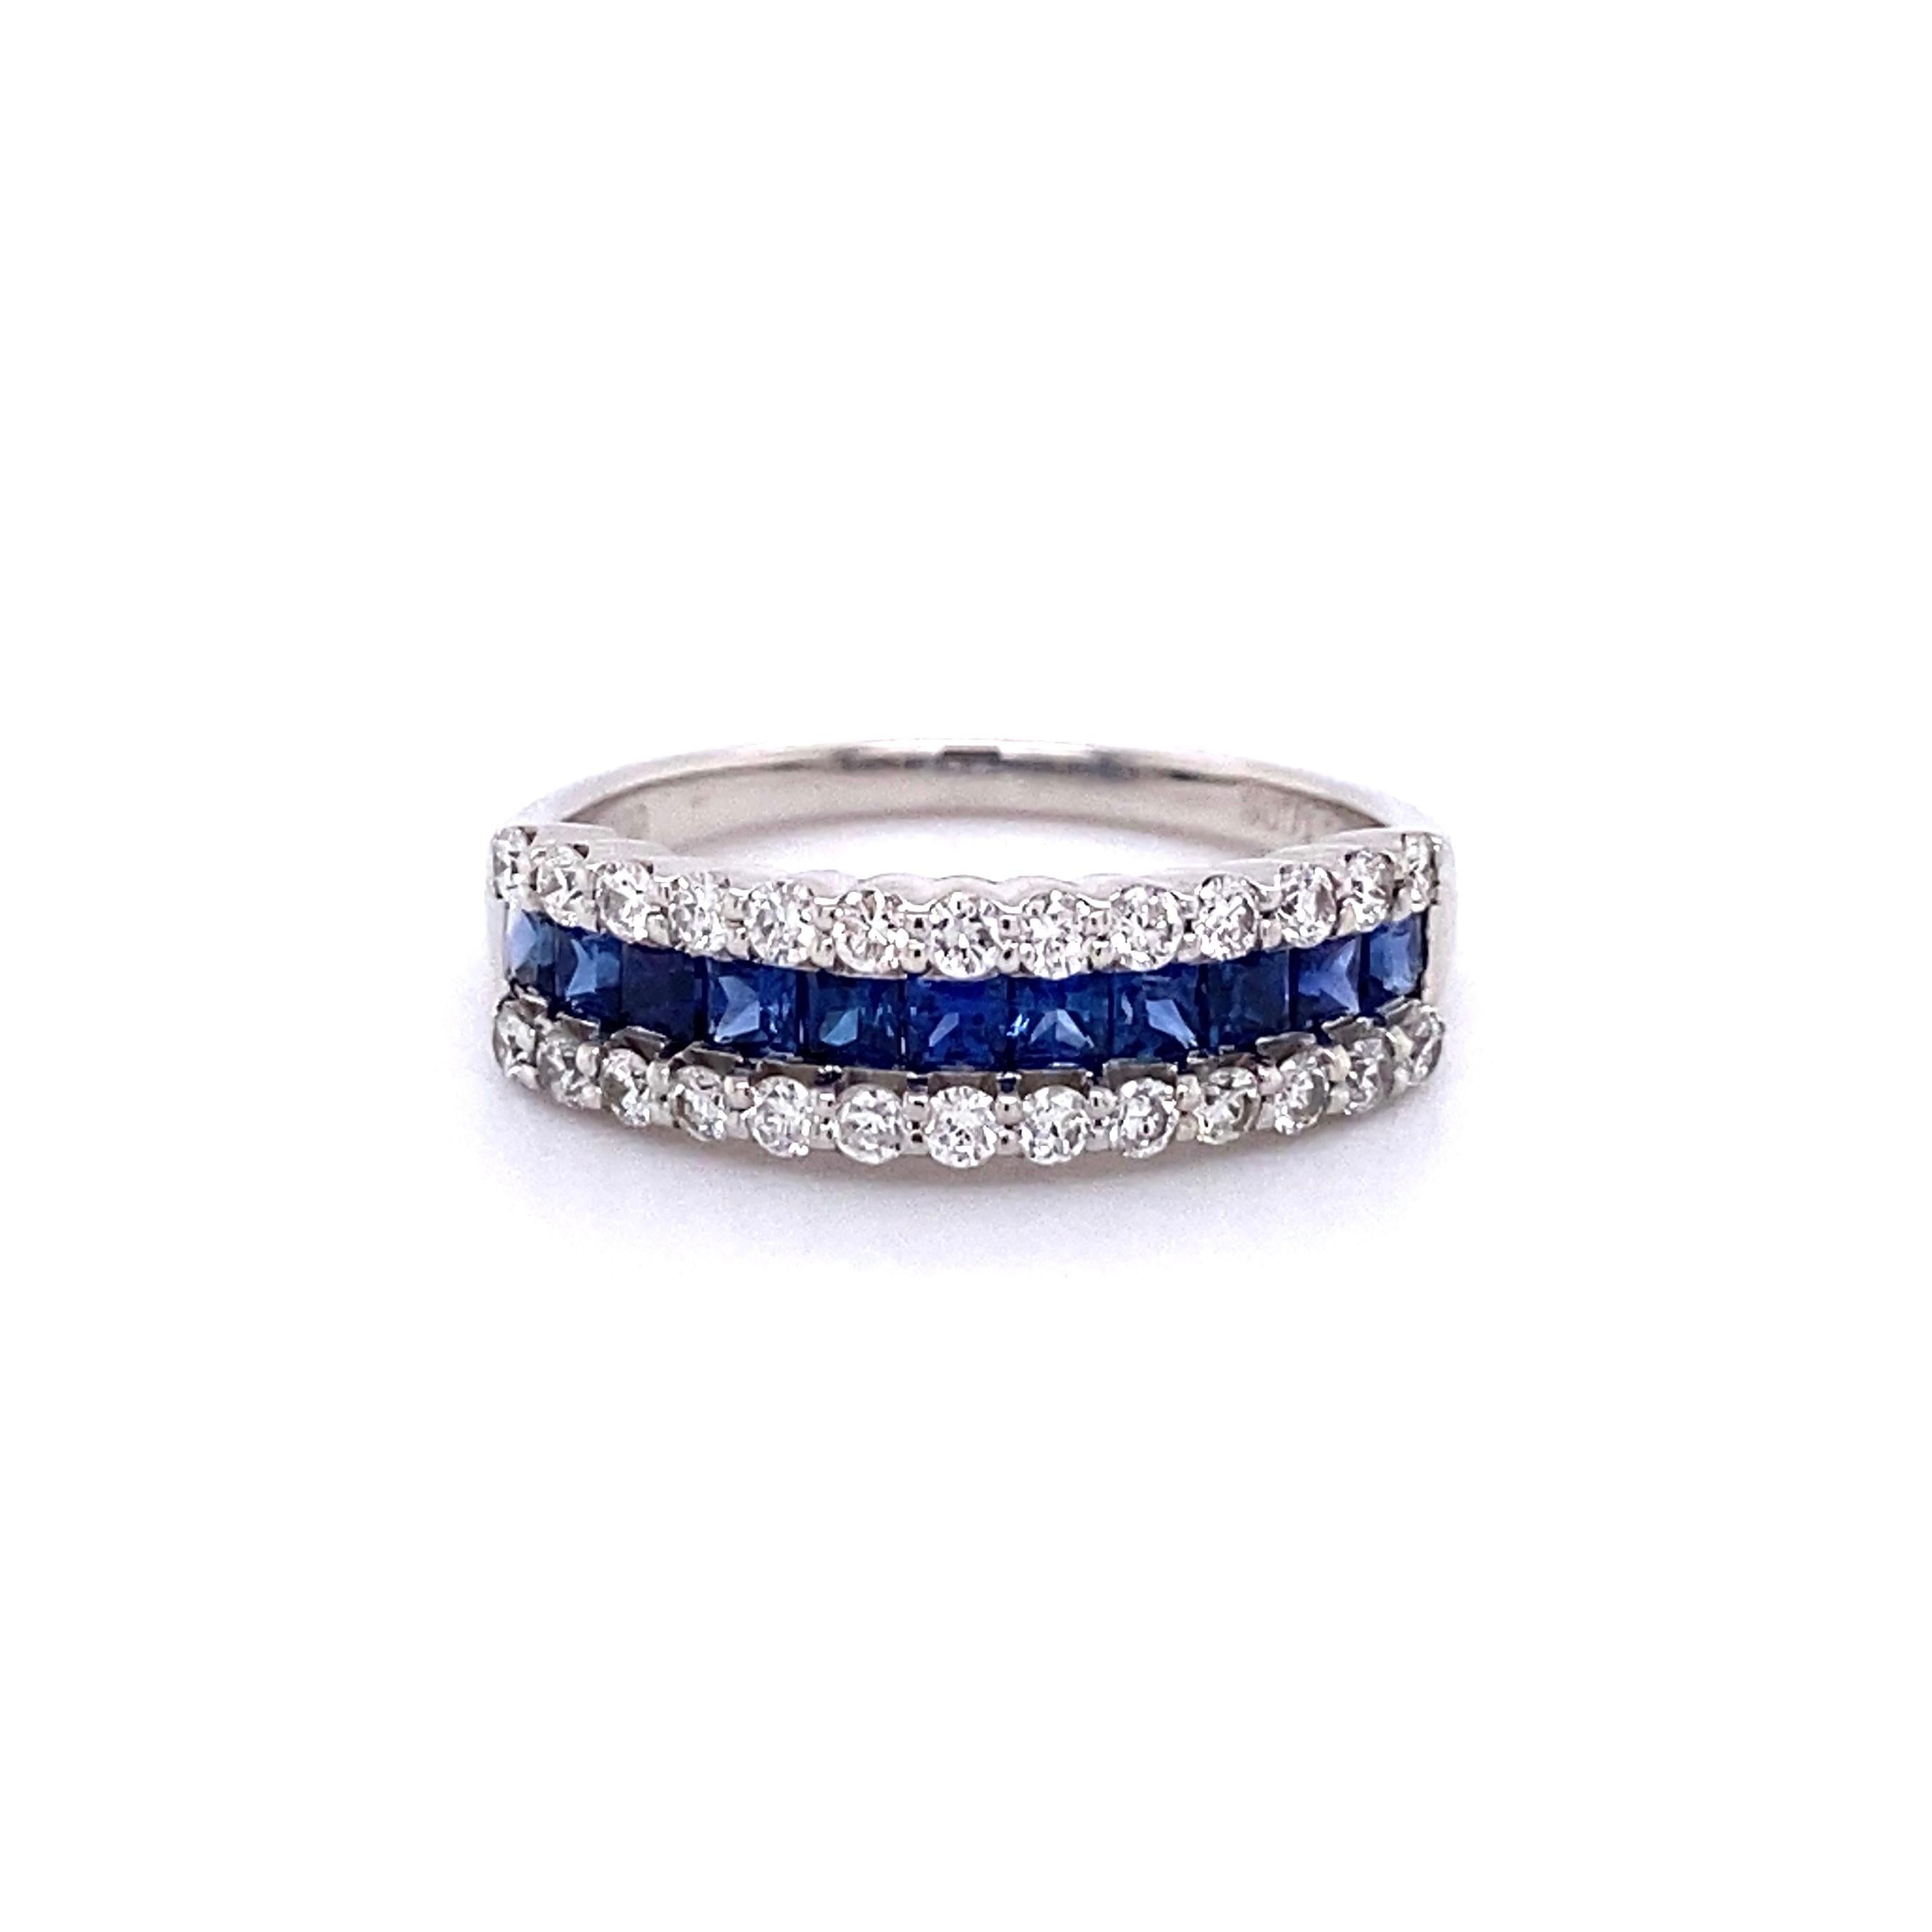 Mixed Cut Vintage Sapphire and Diamond Platinum Band Cocktail Ring Estate Fine Jewelry For Sale